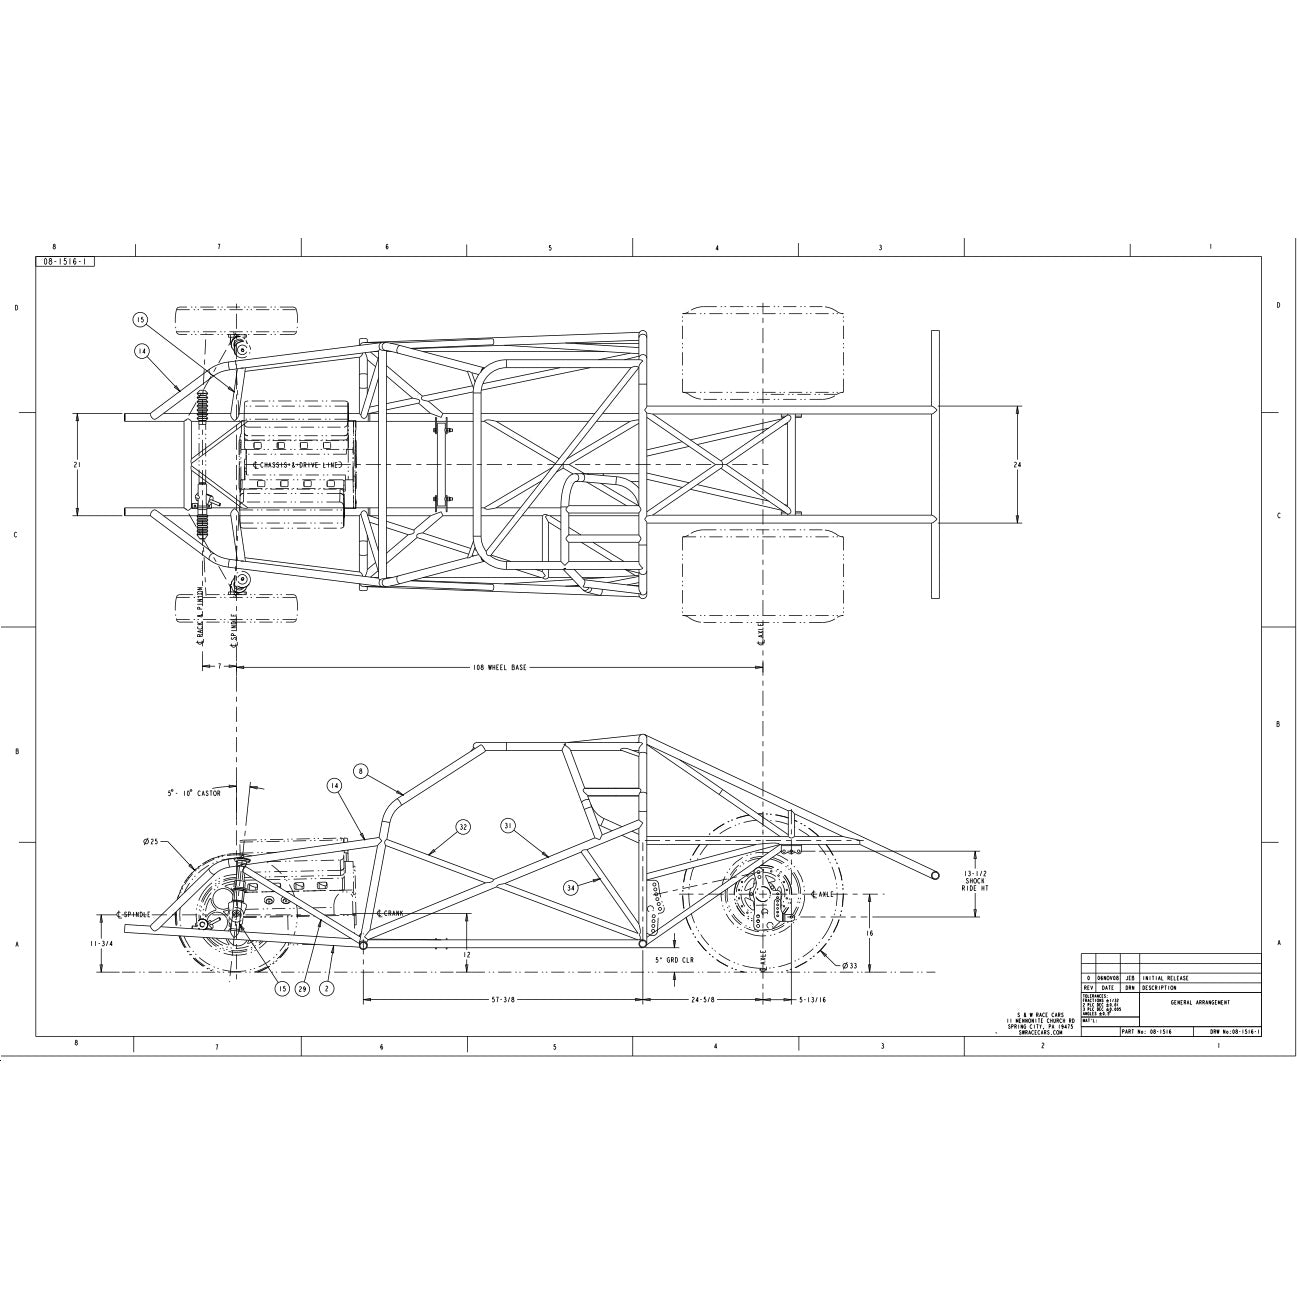 1968-1973 Opel GT Tube Chassis Blueprint